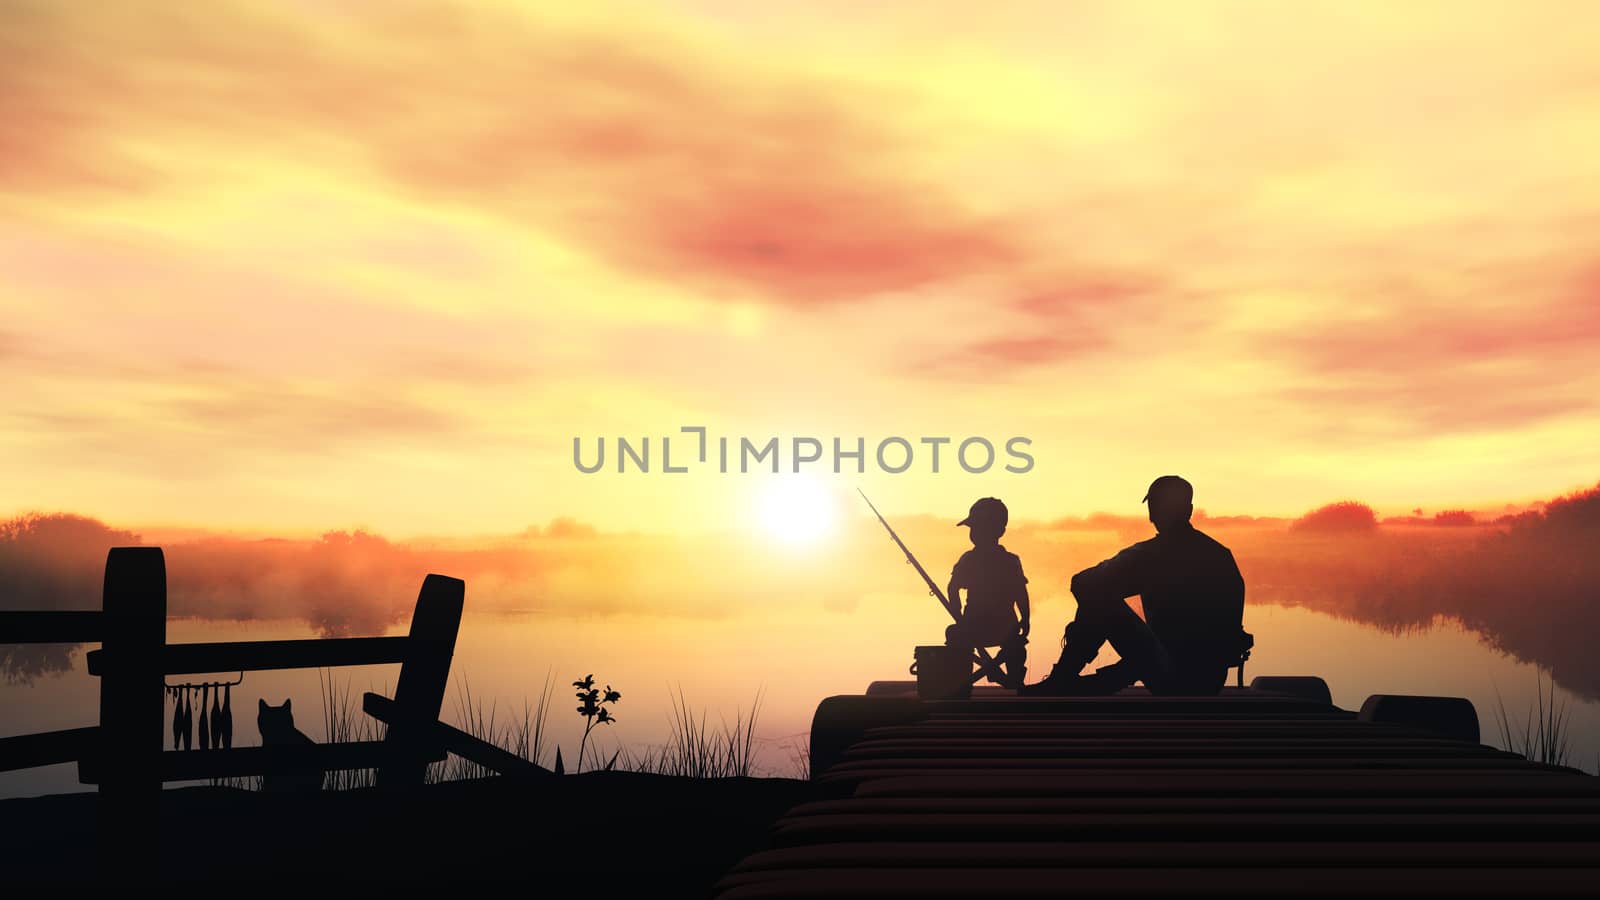 Silhouettes of father and son catching fish from a wooden pier at dawn.